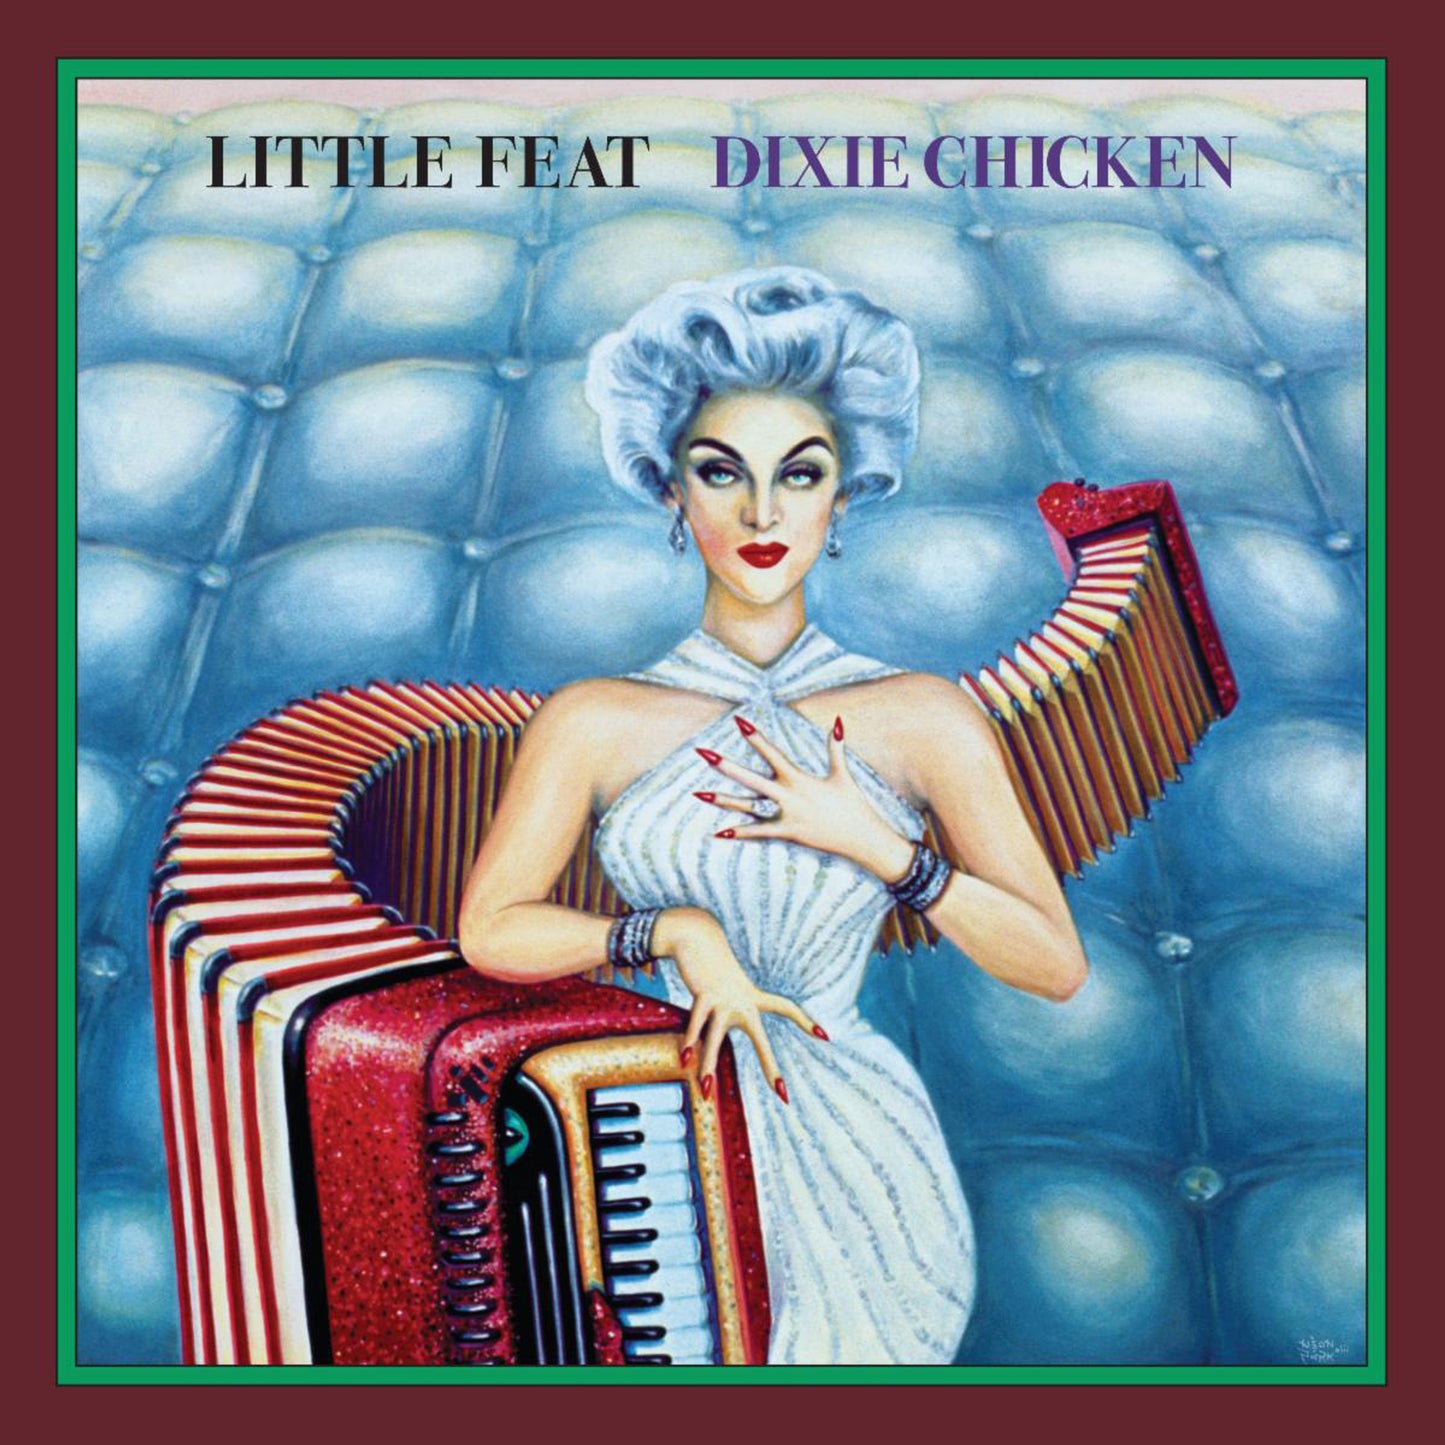 Little Feat - Dixie Chicken (Deluxe Edition) - LP